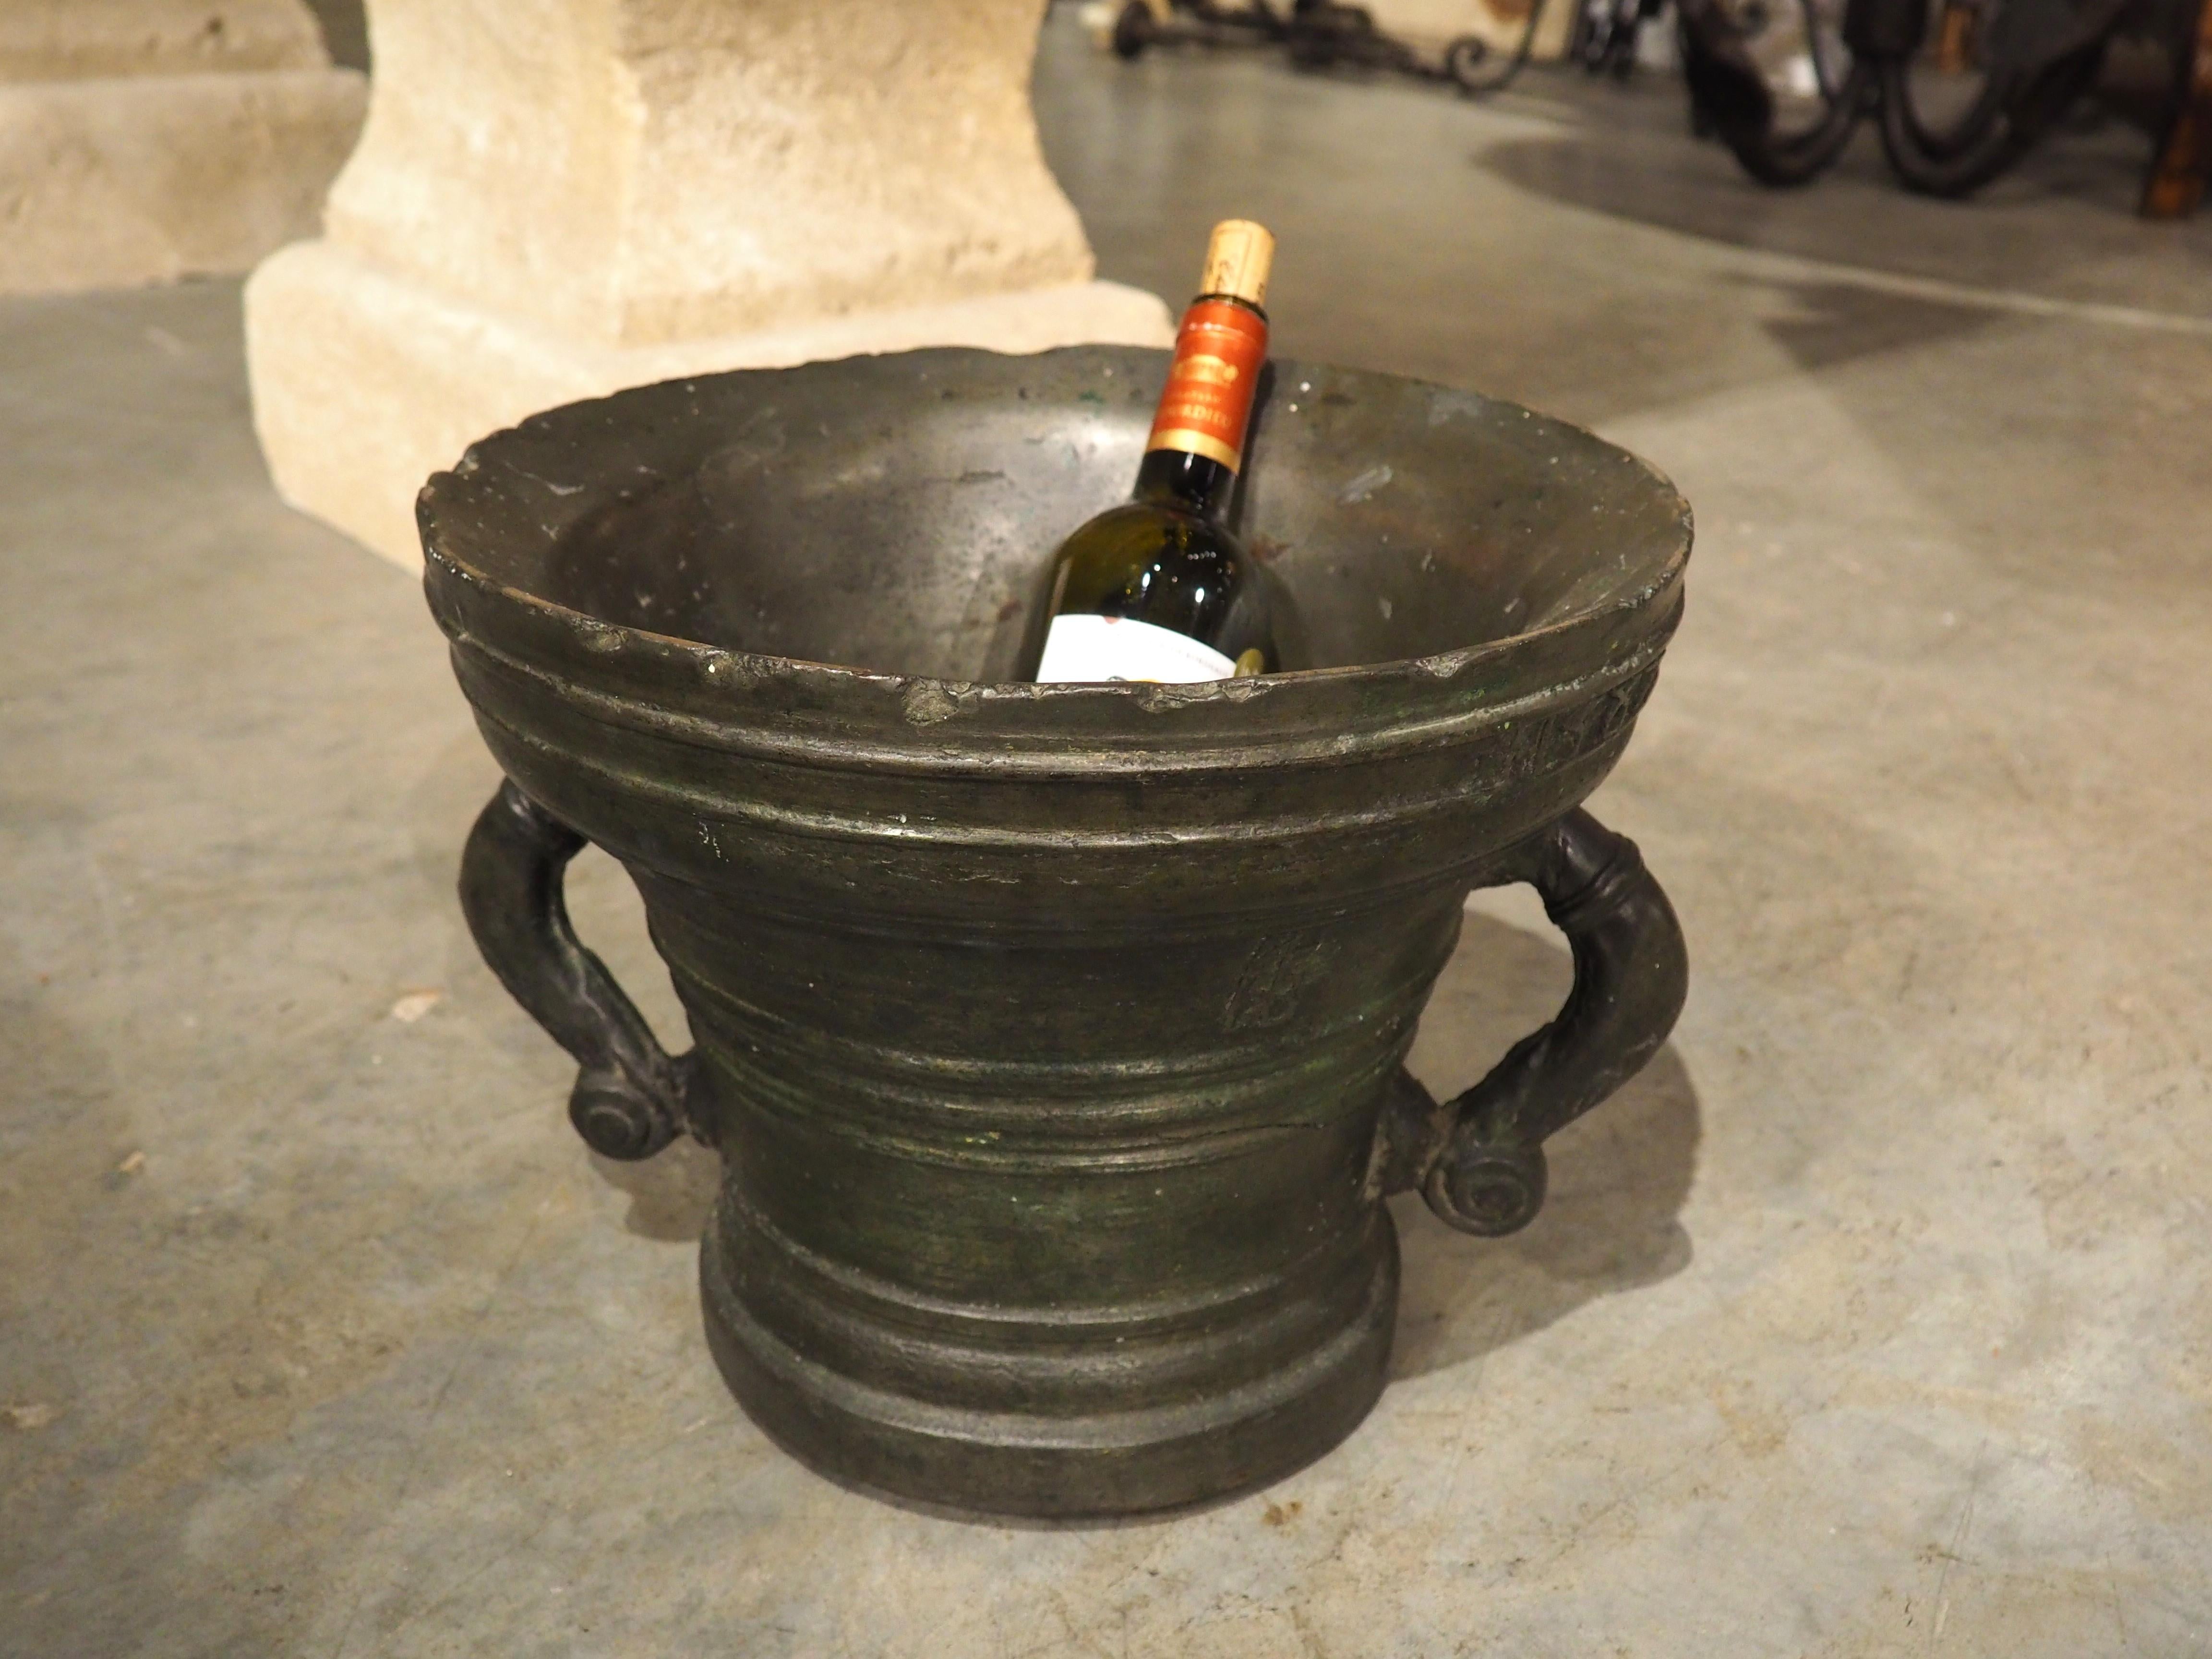 A large and heavy (it weighs 109 lbs!) example of a traditional French pharmacy bowl, this bronze mortar with handles is from 1587, as seen on the production date beneath the molded rim. There is also a maker’s mark on the main body, between two of